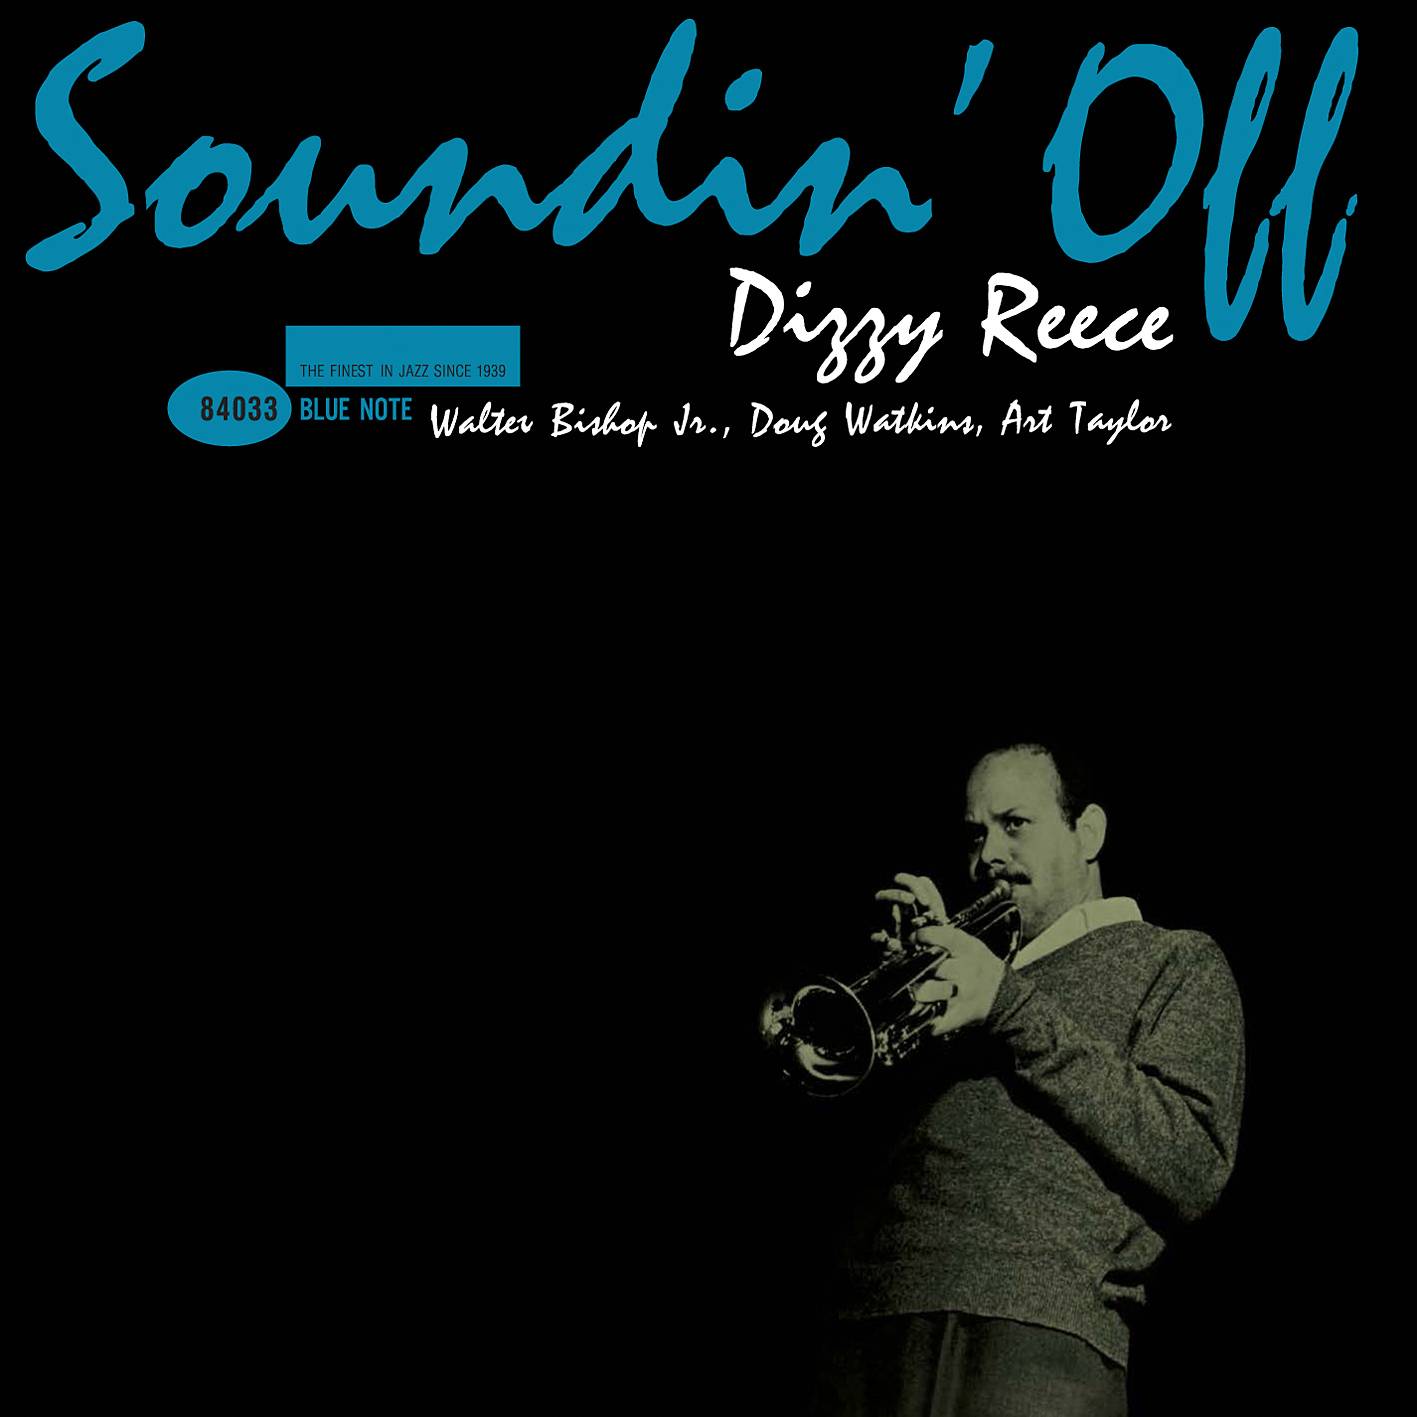 Dizzy Reece – Soundin’ Off (1960) [Analogue Productions 2011] SACD ISO + Hi-Res FLAC